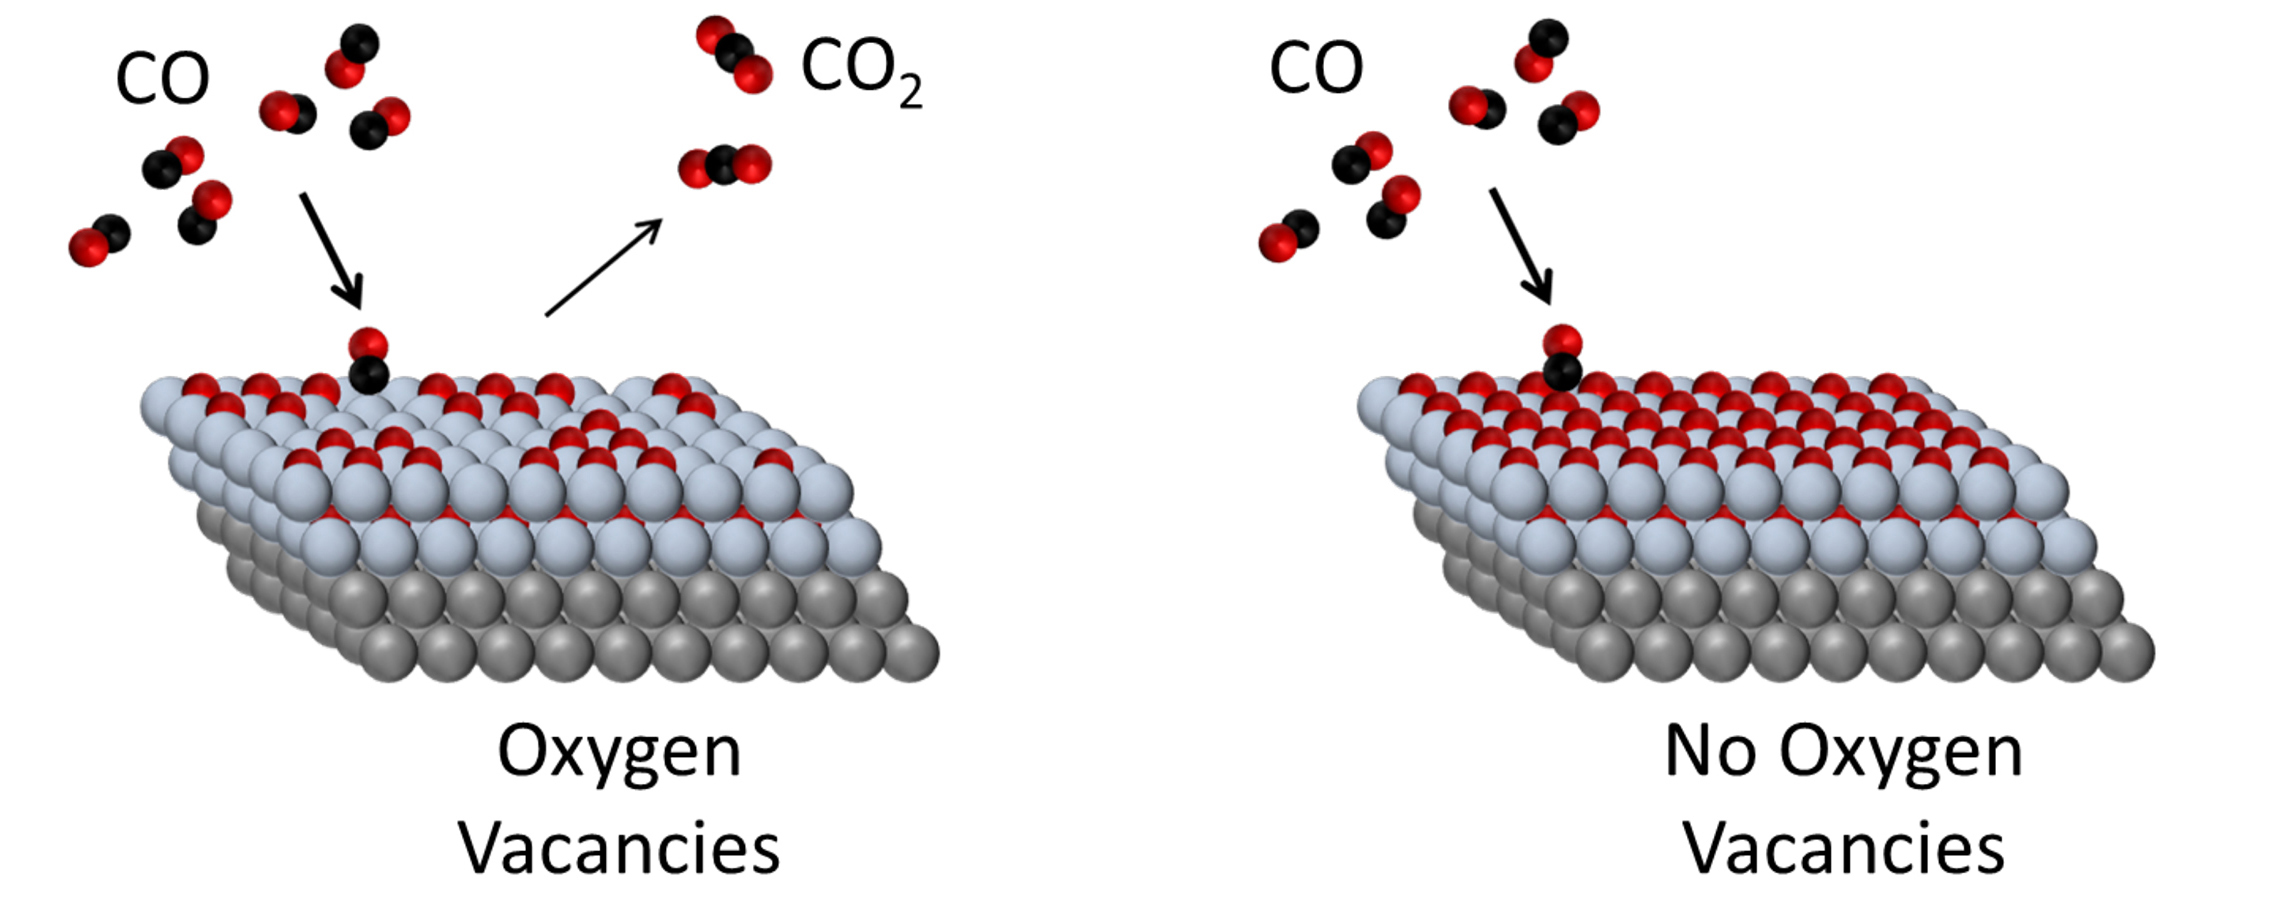 Without oxygen vacancies, CO-to-CO2 conversion stops on platinum/cobalt oxide catalyst.